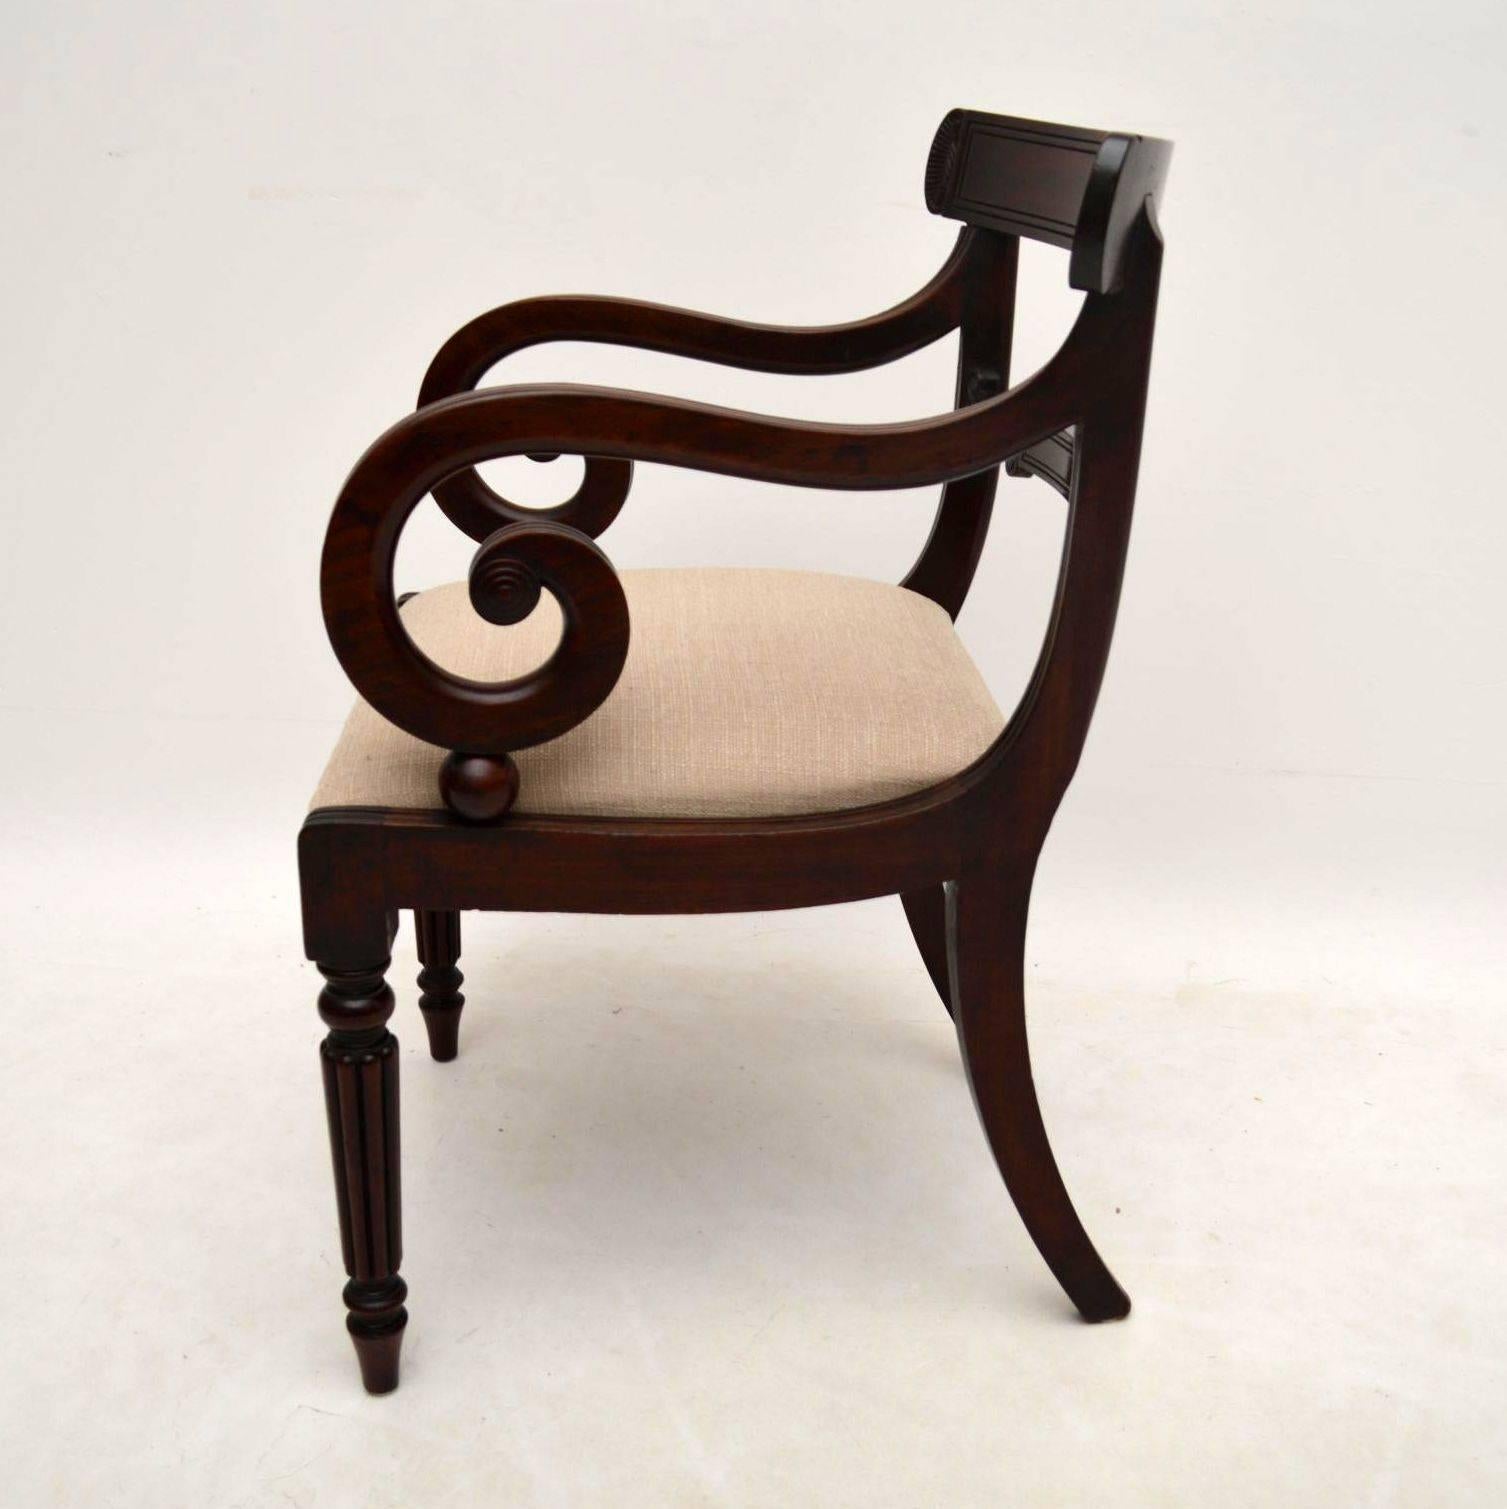 English Antique William IV Mahogany Armchair or Desk Chair